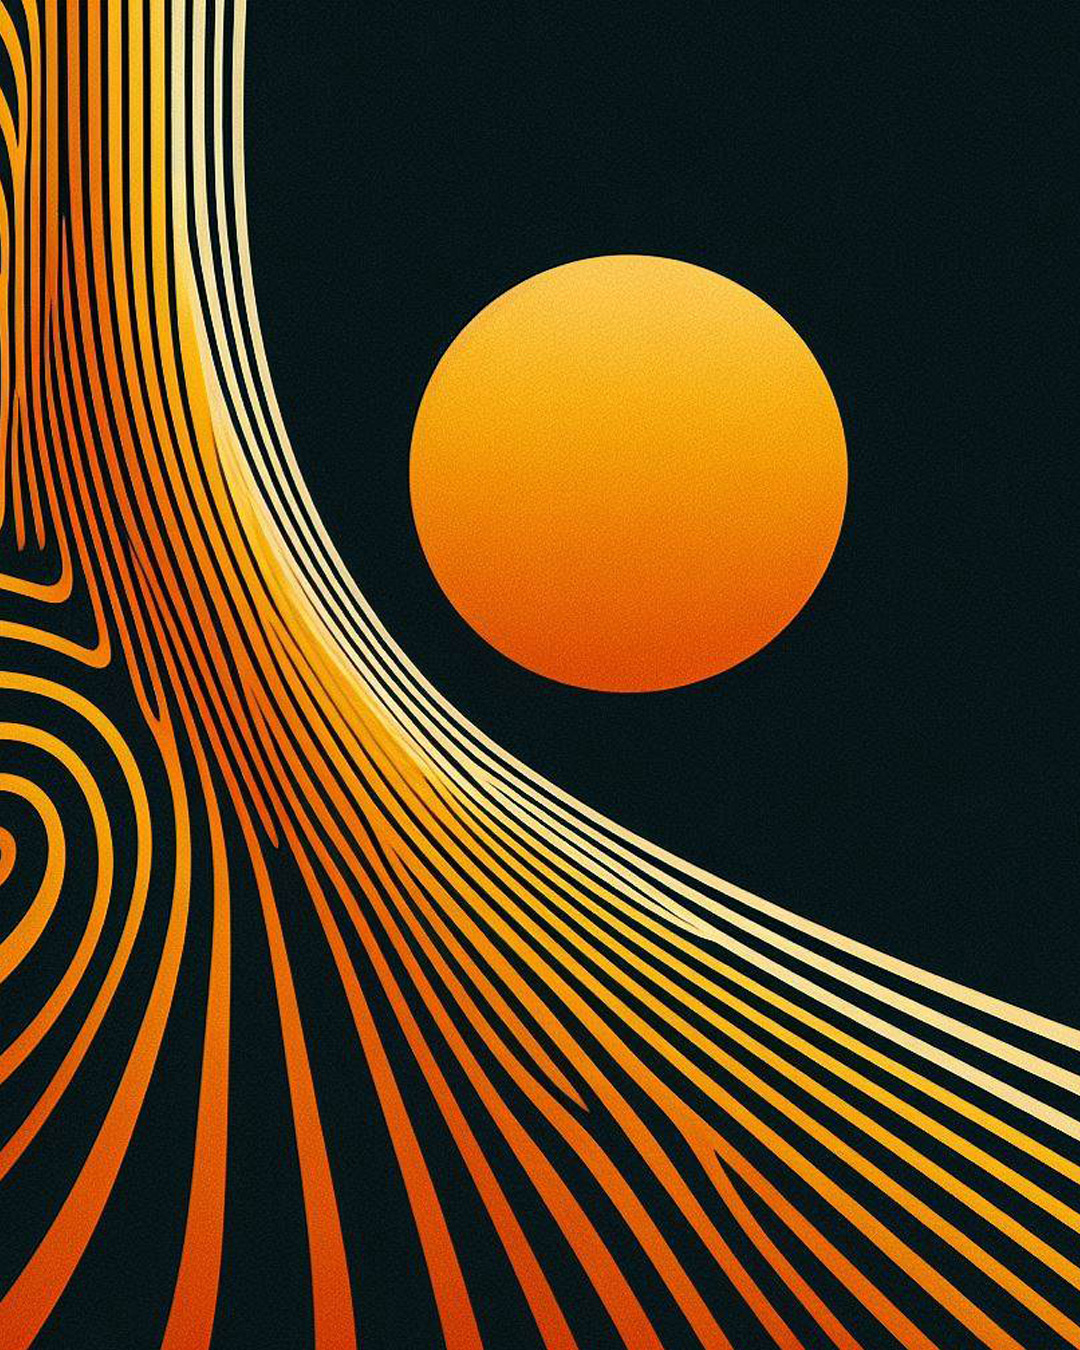 Abstract illustration featuring a warm orange sun against a dark background, with curved white lines creating a ripple effect around the sun.